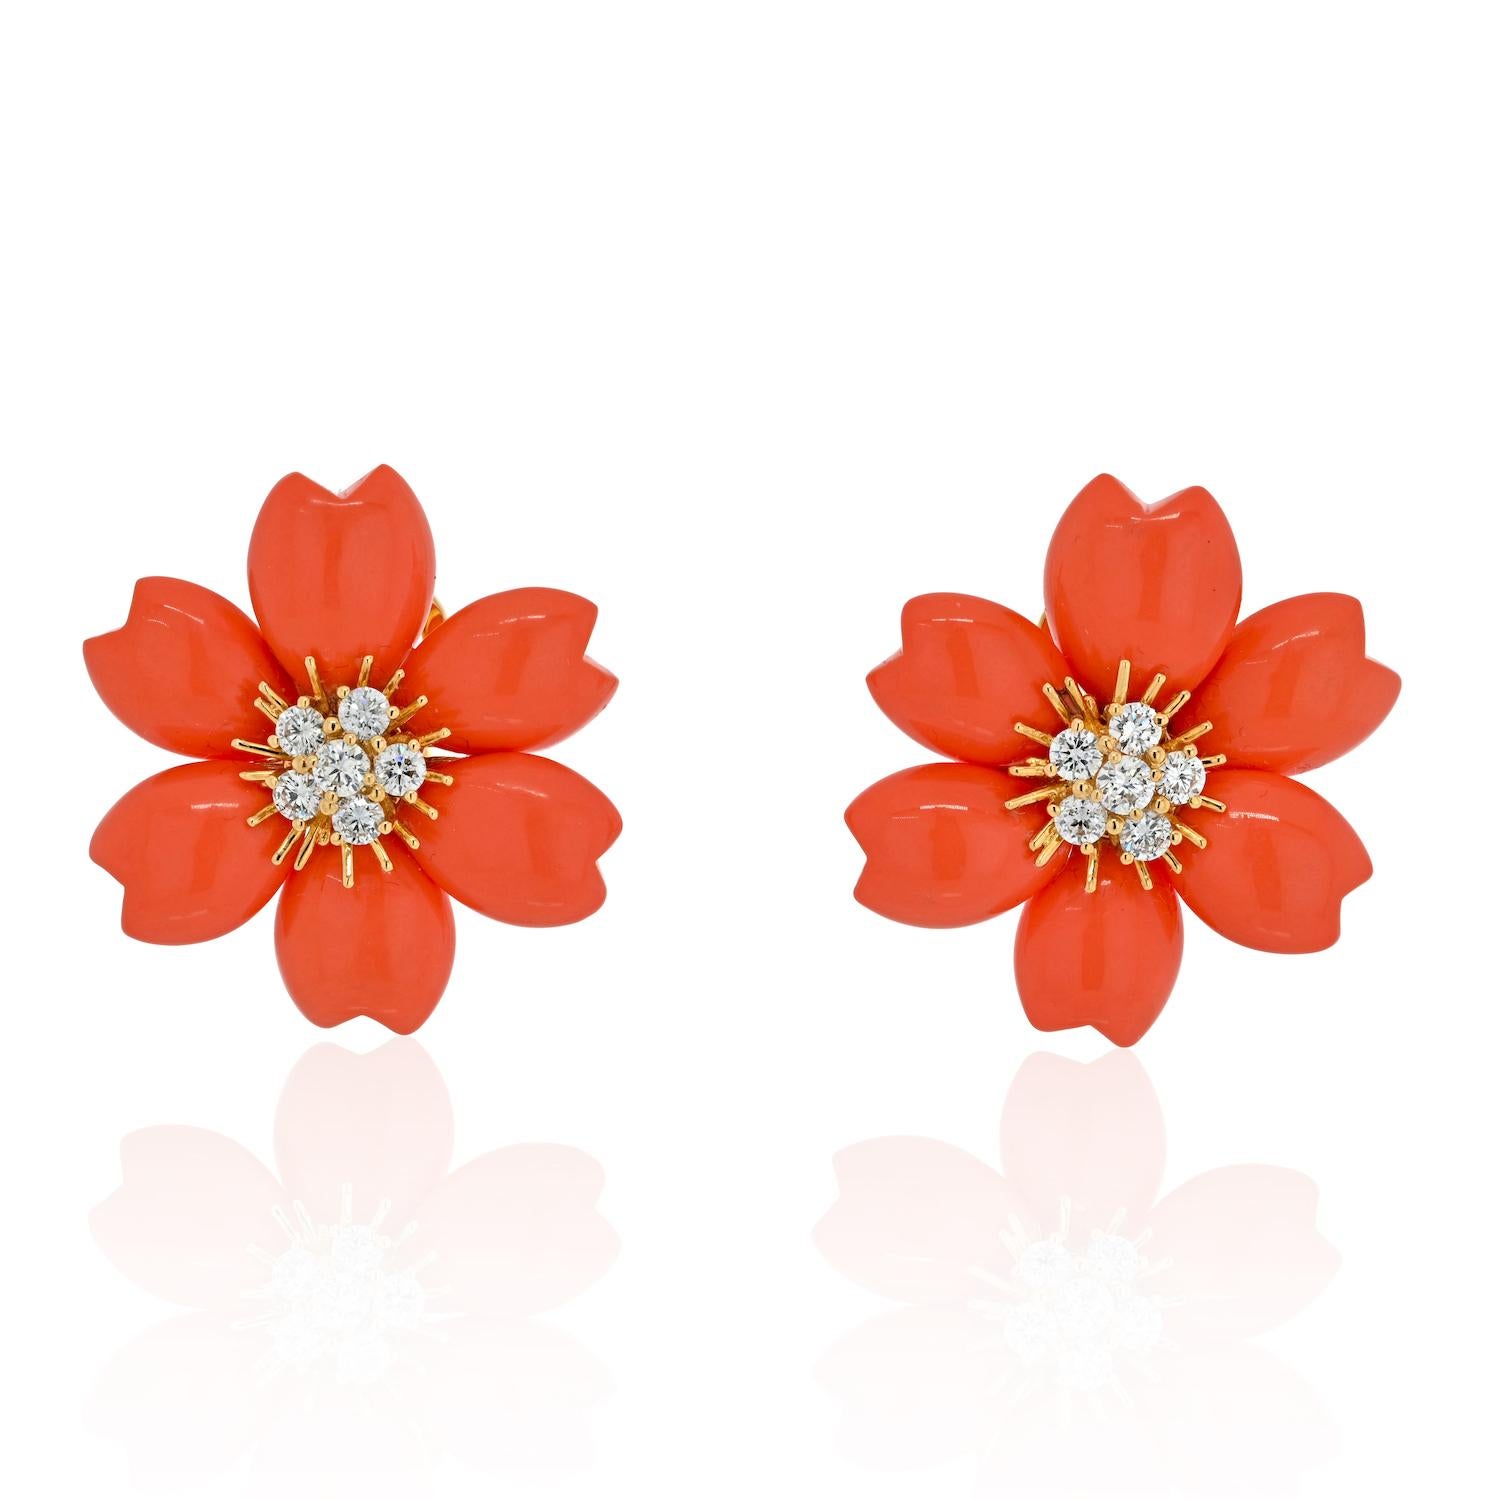 Van Cleef & Arpels Rose de Noël Coral Earrings Small in 18k Yellow Gold.

The recognizable ‘Christmas Rose’, or ‘Rose de Noël’ by Van Cleef & Arpels fashioned in a rare red coral, with a clustered diamond pistil embedded in a gold sunburst, with a